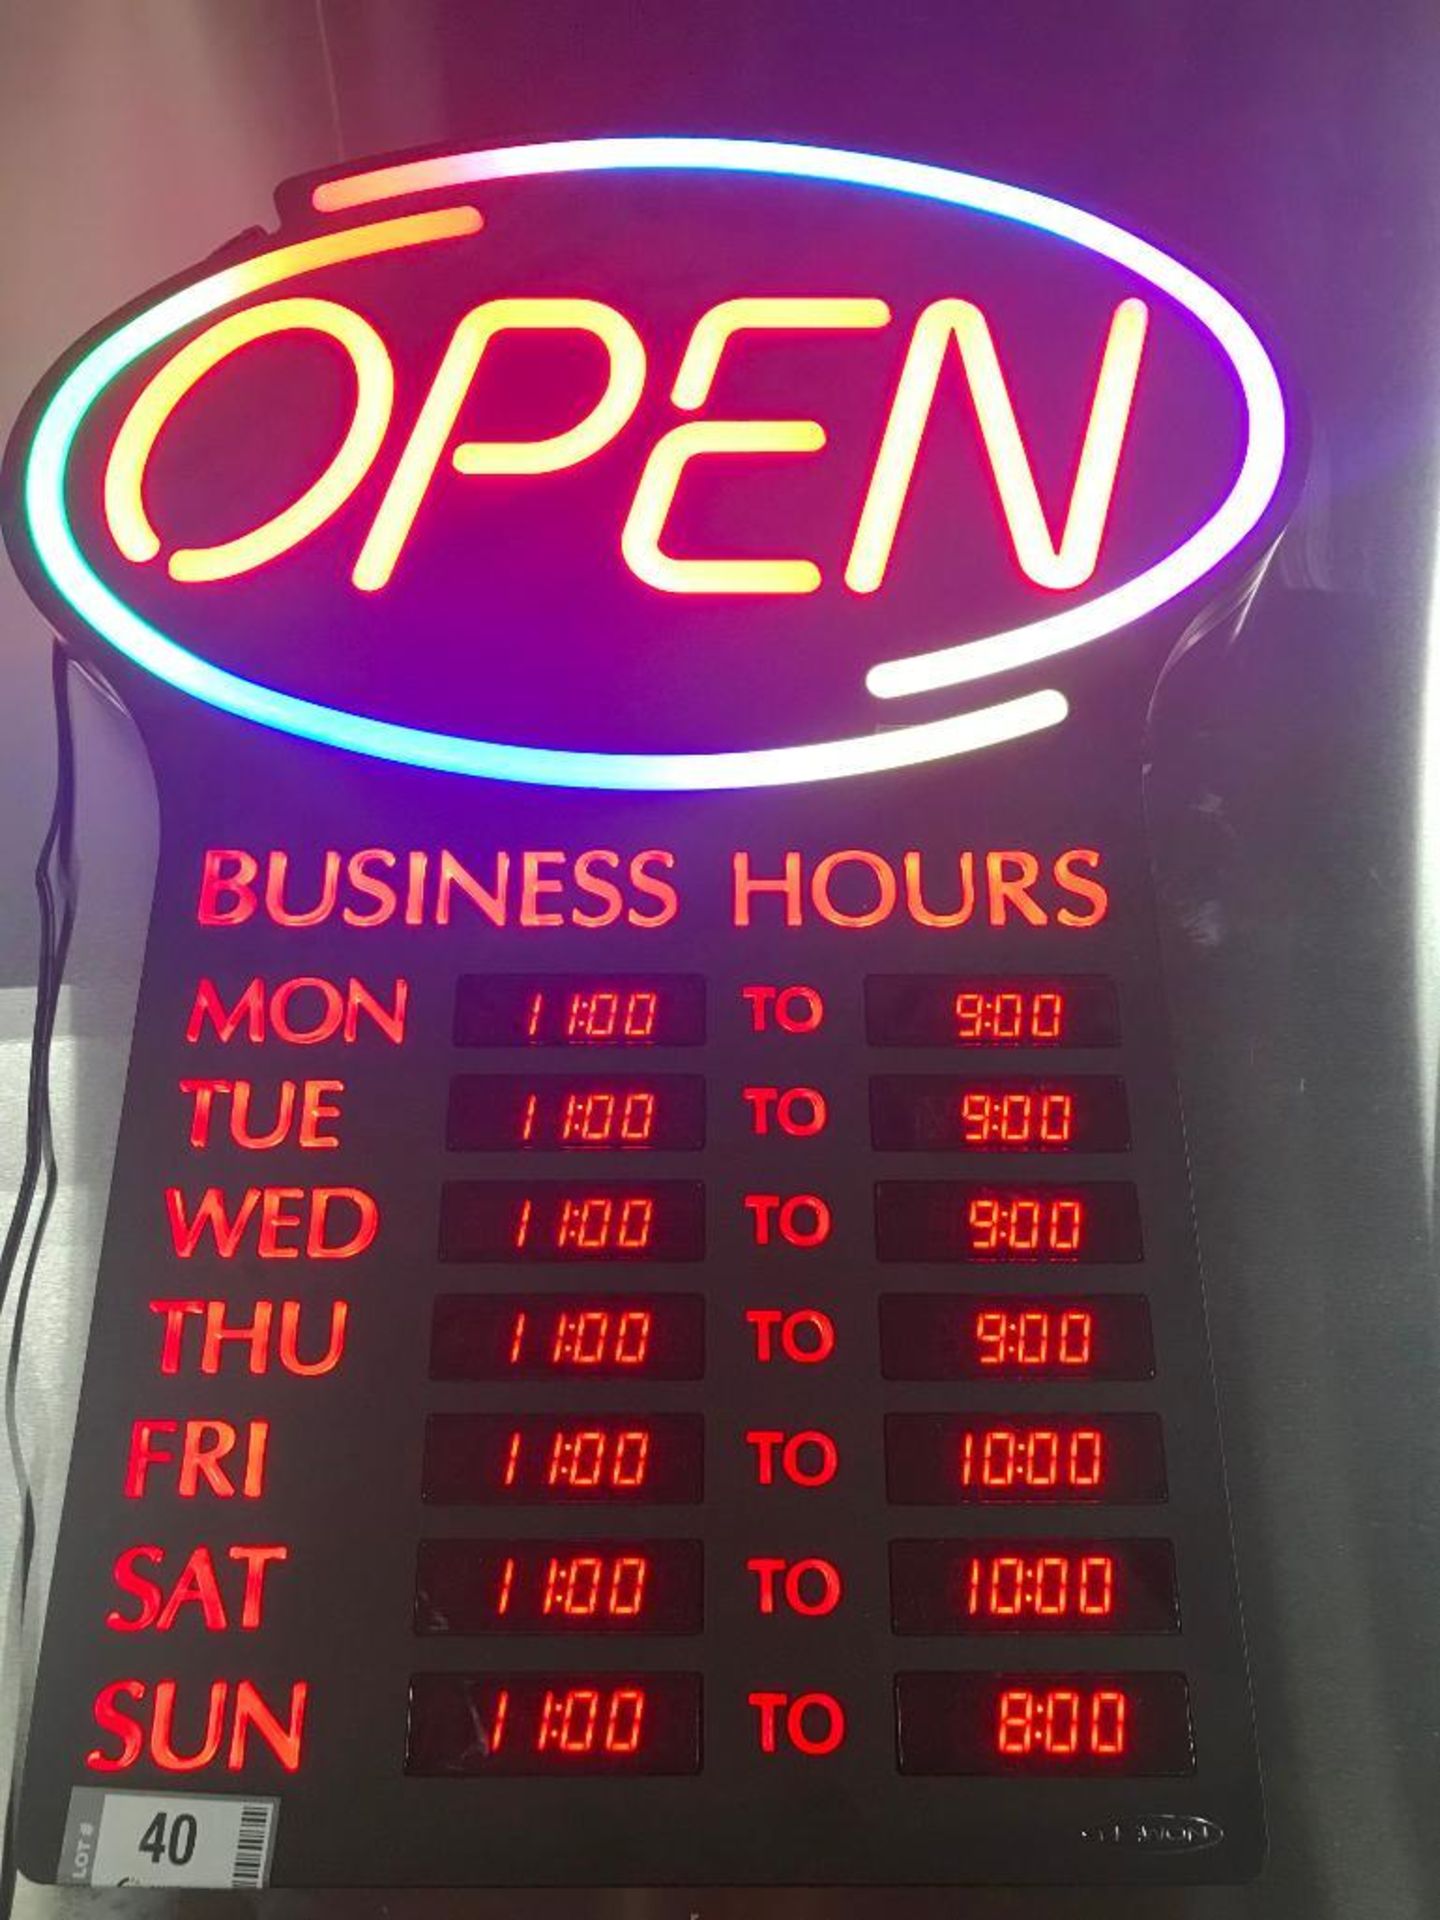 NEWON LED OPEN SIGN WITH PROGRAMMABLE BUSINESS HOURS AND FLASHING EFFECTS - Image 6 of 8